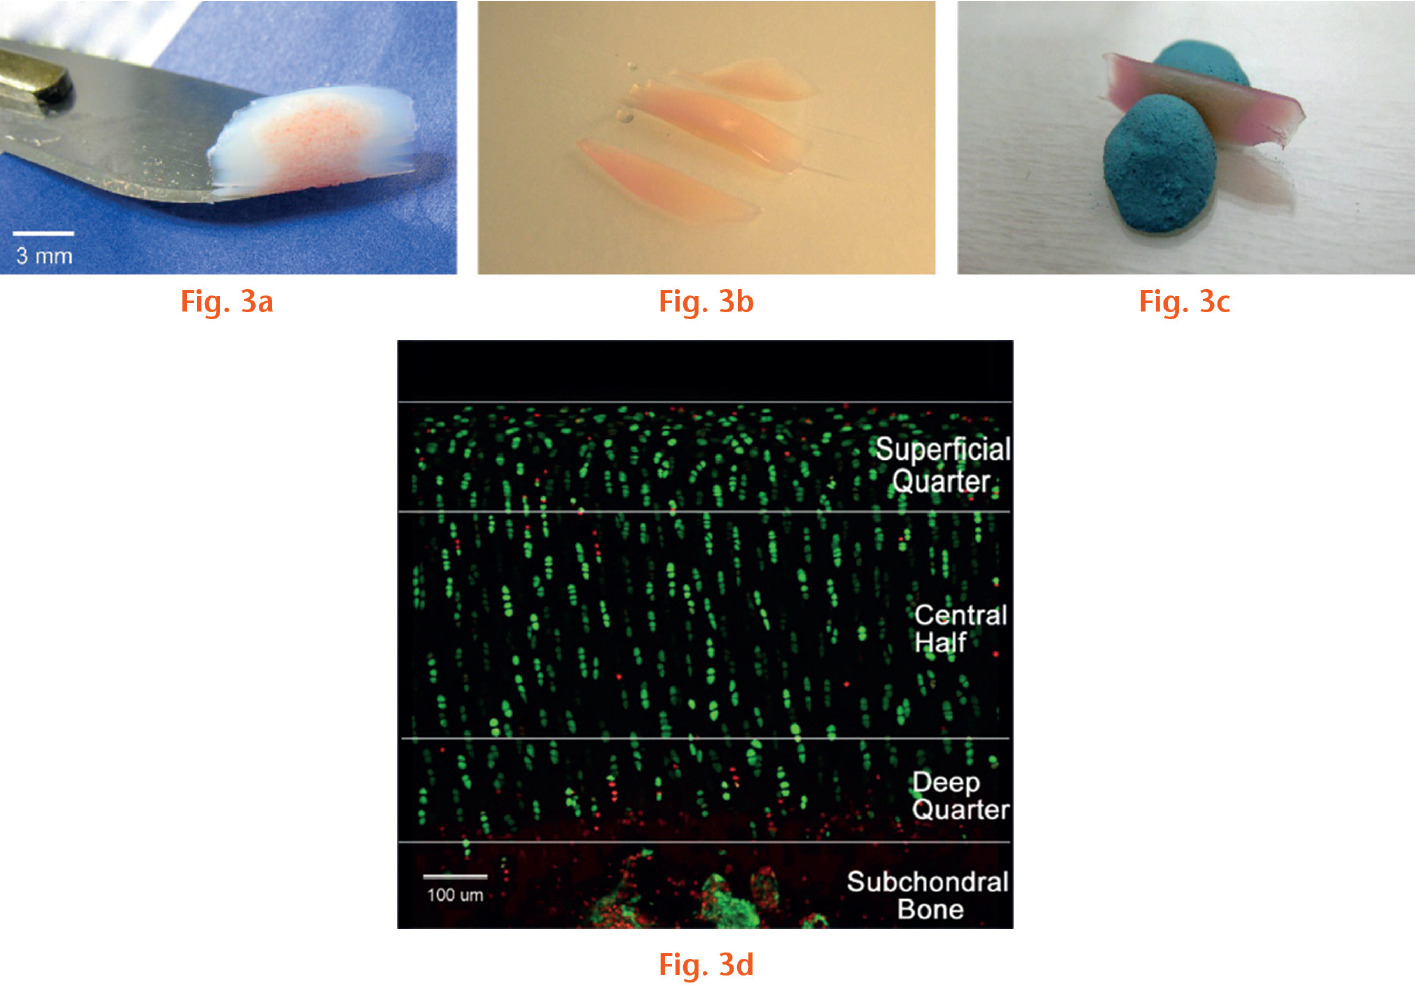  
            Images showing cartilage explant preparation and visualization of fluorescently-labelled in situ chondrocytes by confocal laser scanning microscopy: a) Explants, which included a small amount of subchondral bone attached in the centre, were taken to confirm that these were full-thickness osteochondral samples; b) the sample was cut into three pieces in which the two cut lines were parallel; c) the middle part was chosen and secured on a Petri dish with two small pieces of Blu Tack (Bostik, Leicester, United Kingdom). d) A coronal image illustrated the zonal distribution and viability of chondrocytes throughout the full cartilage thickness. Living chondrocytes were stained green by 5-chloromethylfluorescein diacetate (CMFDA) and dead chondrocytes stained red by propidium iodide (PI). The region of interest in the image was set according to the cartilage thickness. The top 25% thickness of cartilage was considered the superficial quarter, the subsequent 50% the central half, and the final 25% the deep quarter. At the bottom of the image, the subchondral bone contained multinucleated osteoblasts and osteoclasts.
          